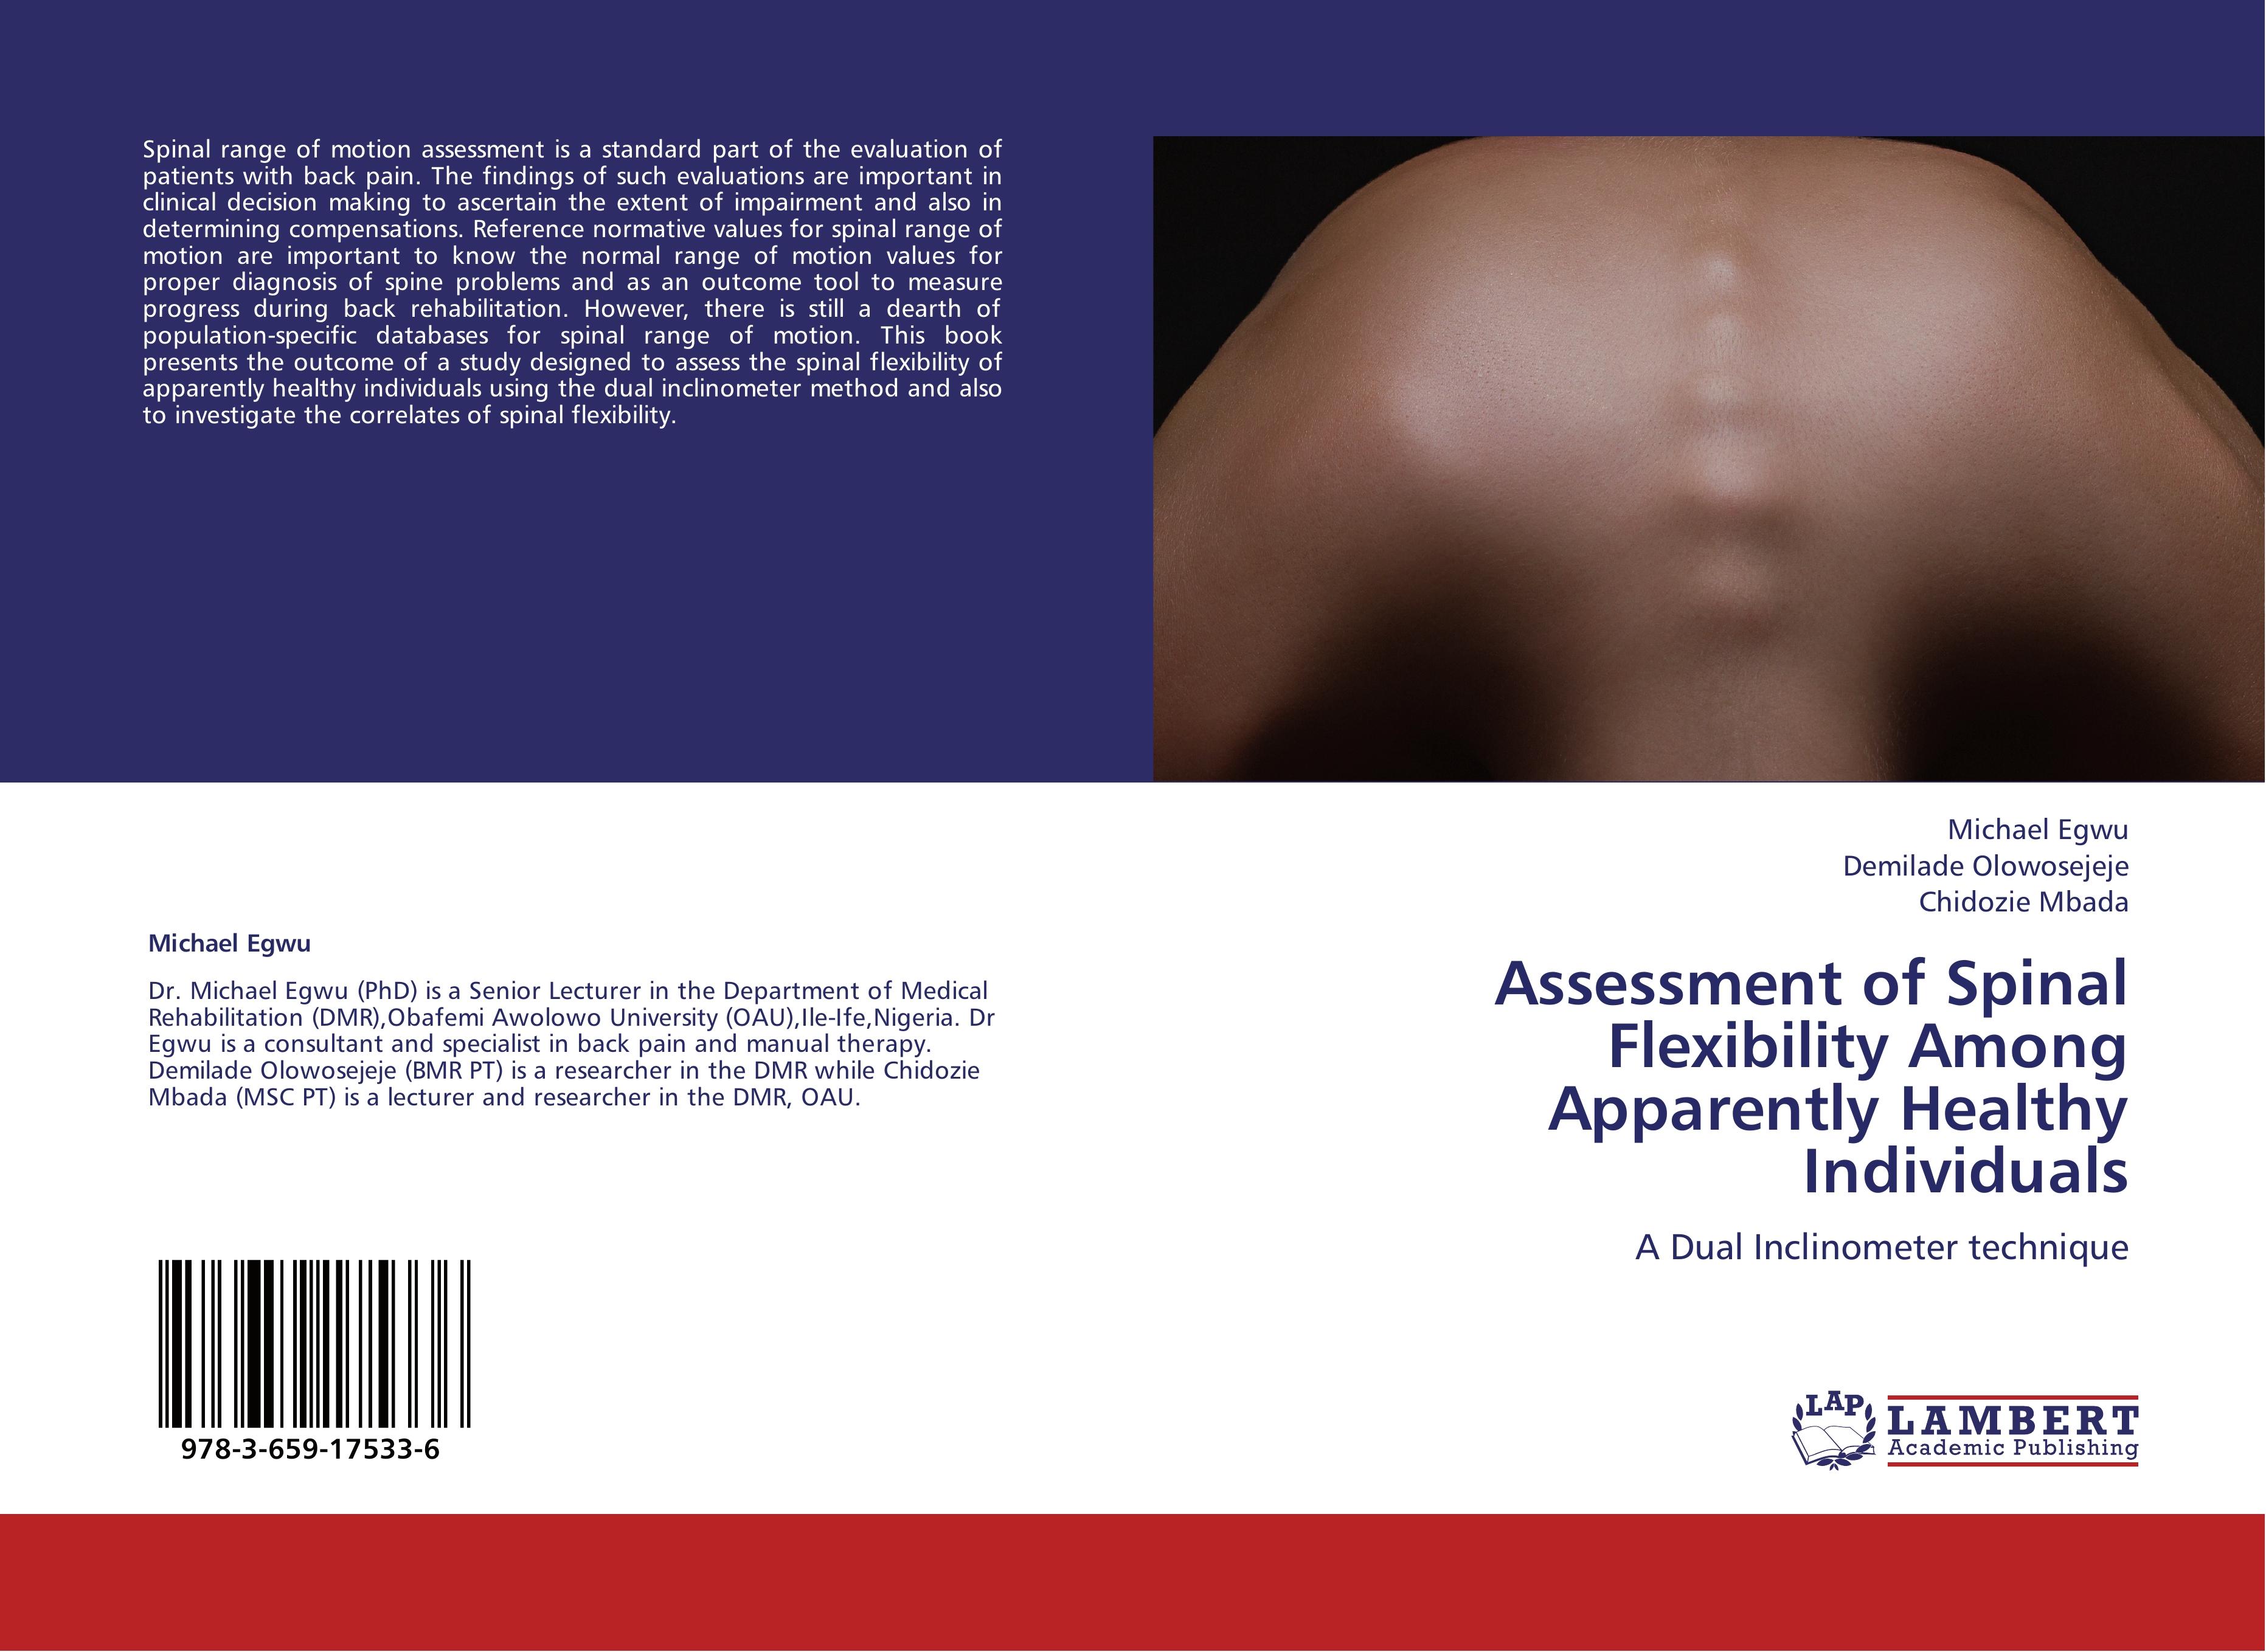 Assessment of Spinal Flexibility Among Apparently Healthy Individuals - Michael Egwu|Demilade Olowosejeje|Chidozie Mbada